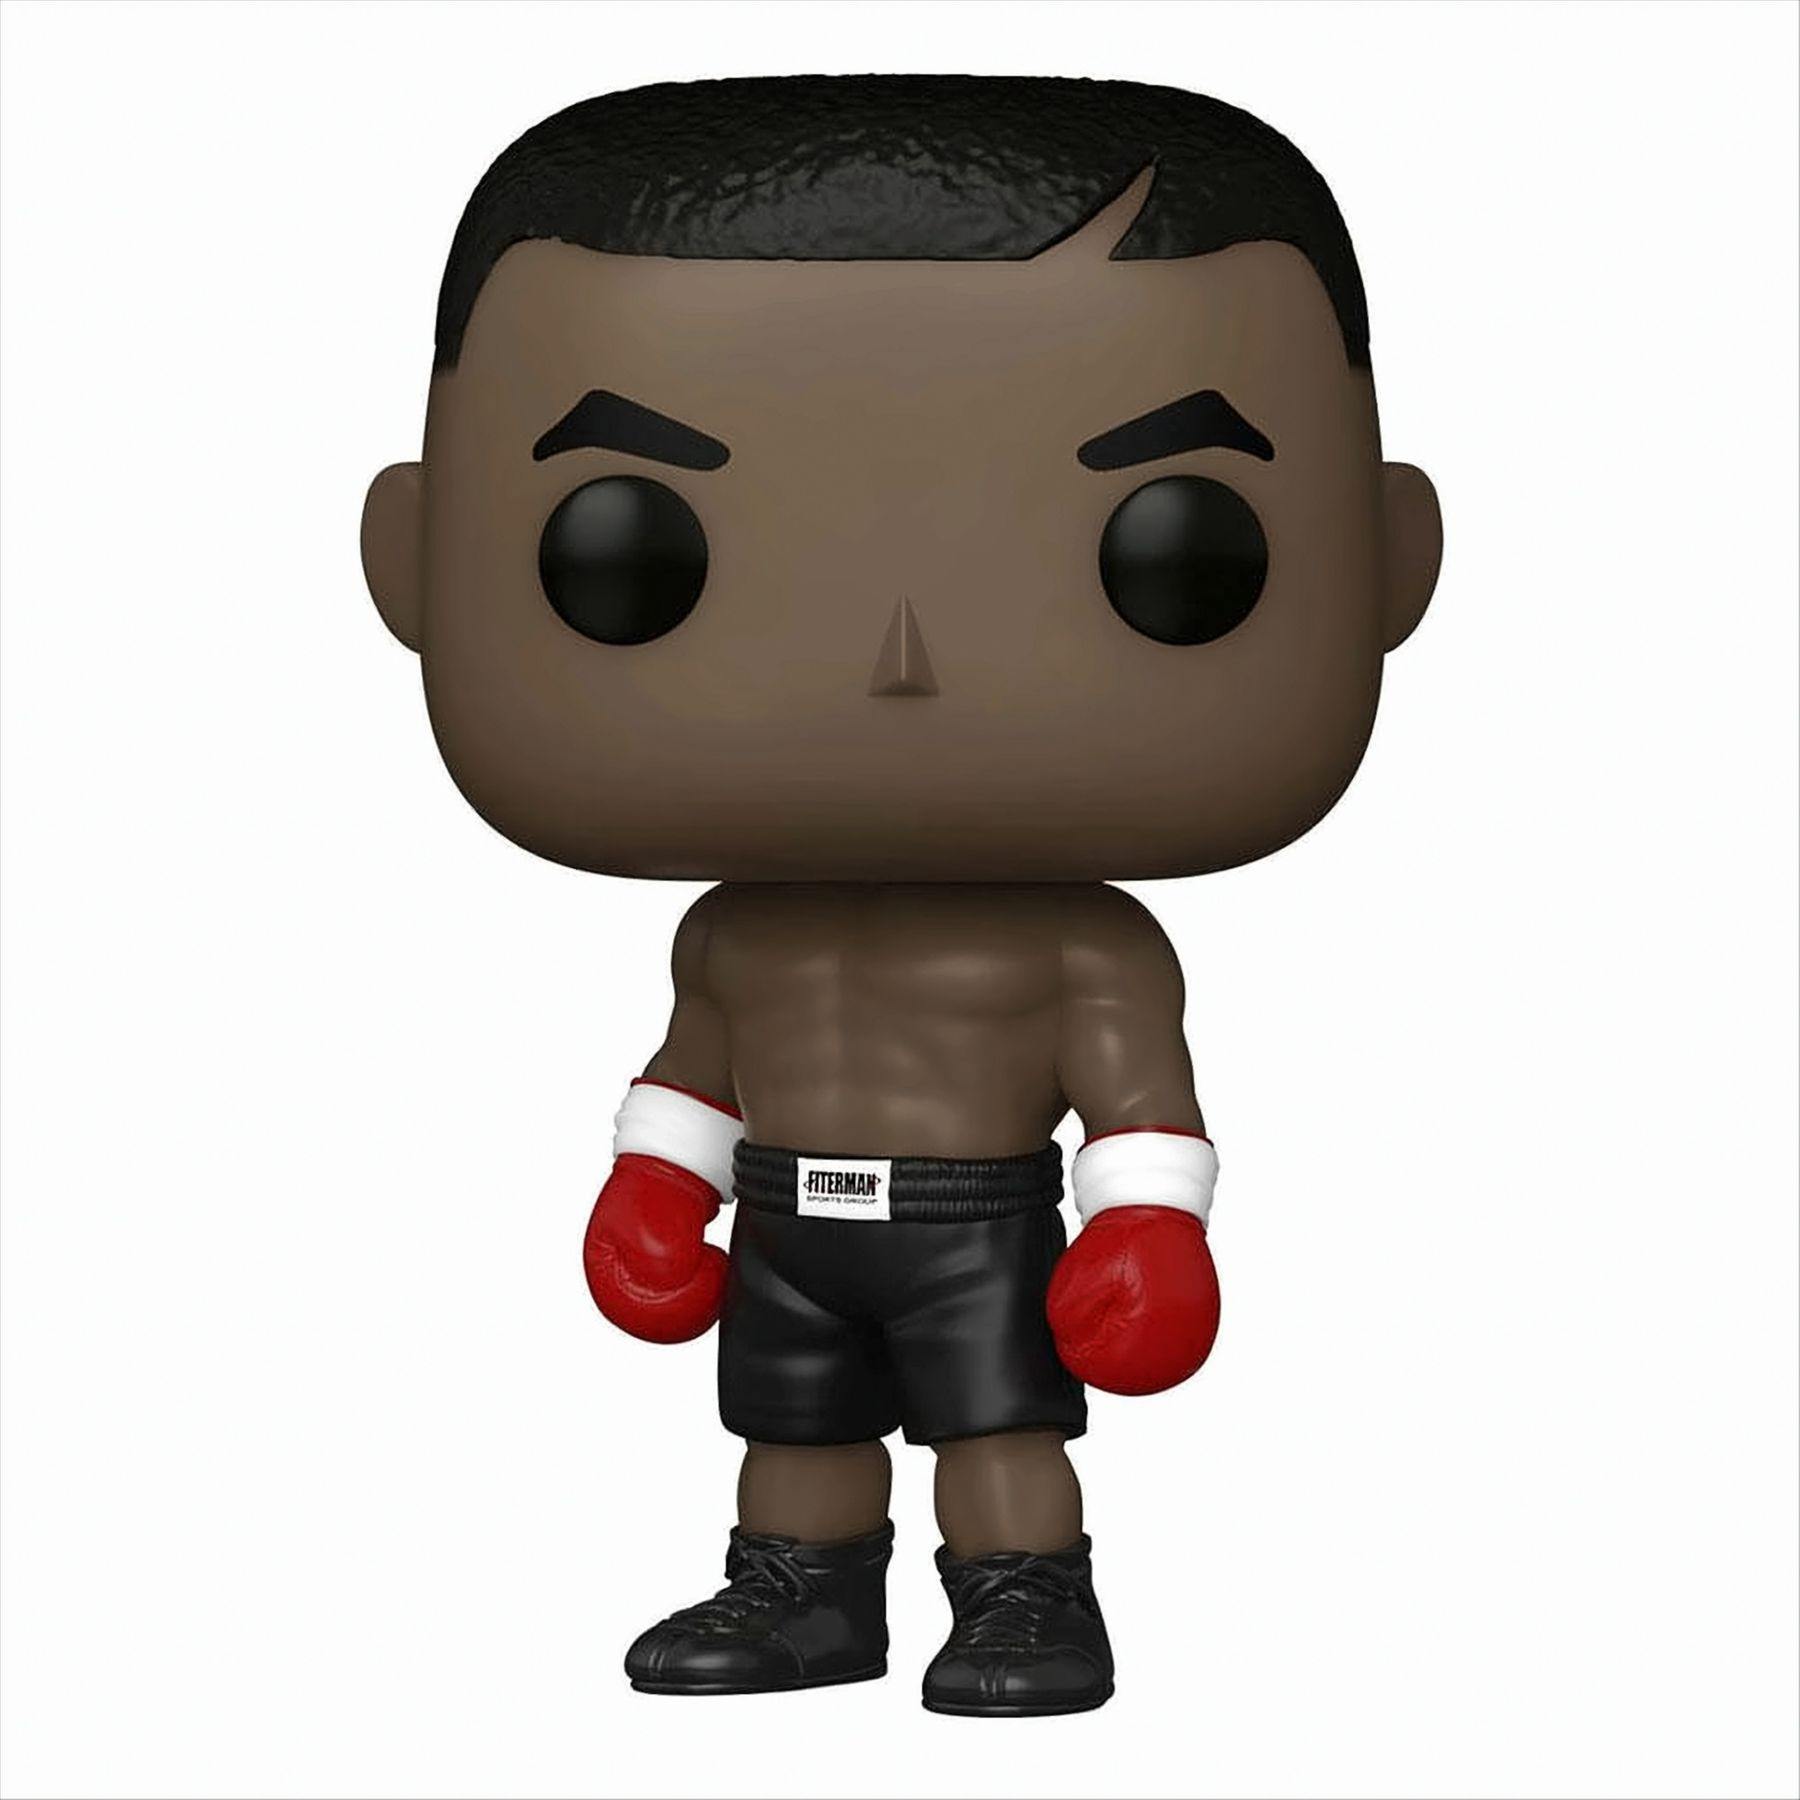 Mike Tyson - Boxing POP